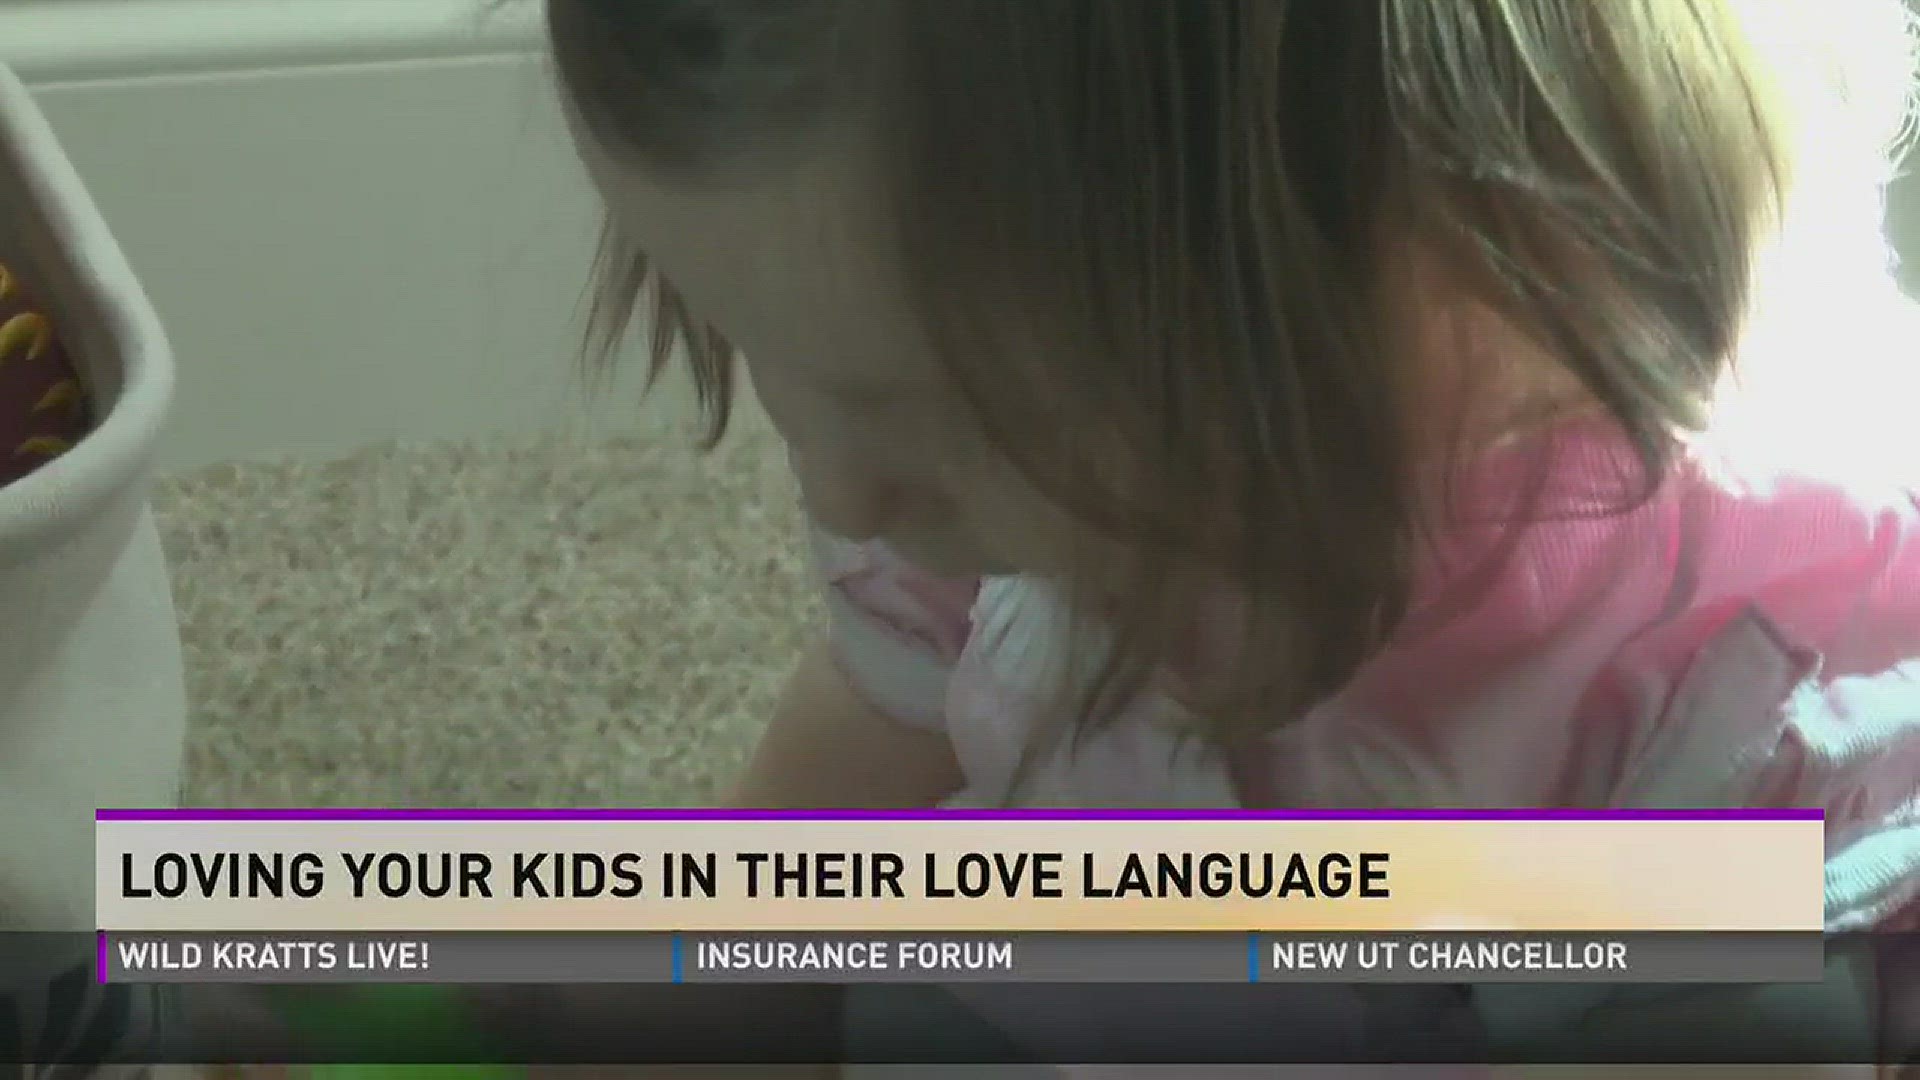 Loving your kids in their love language